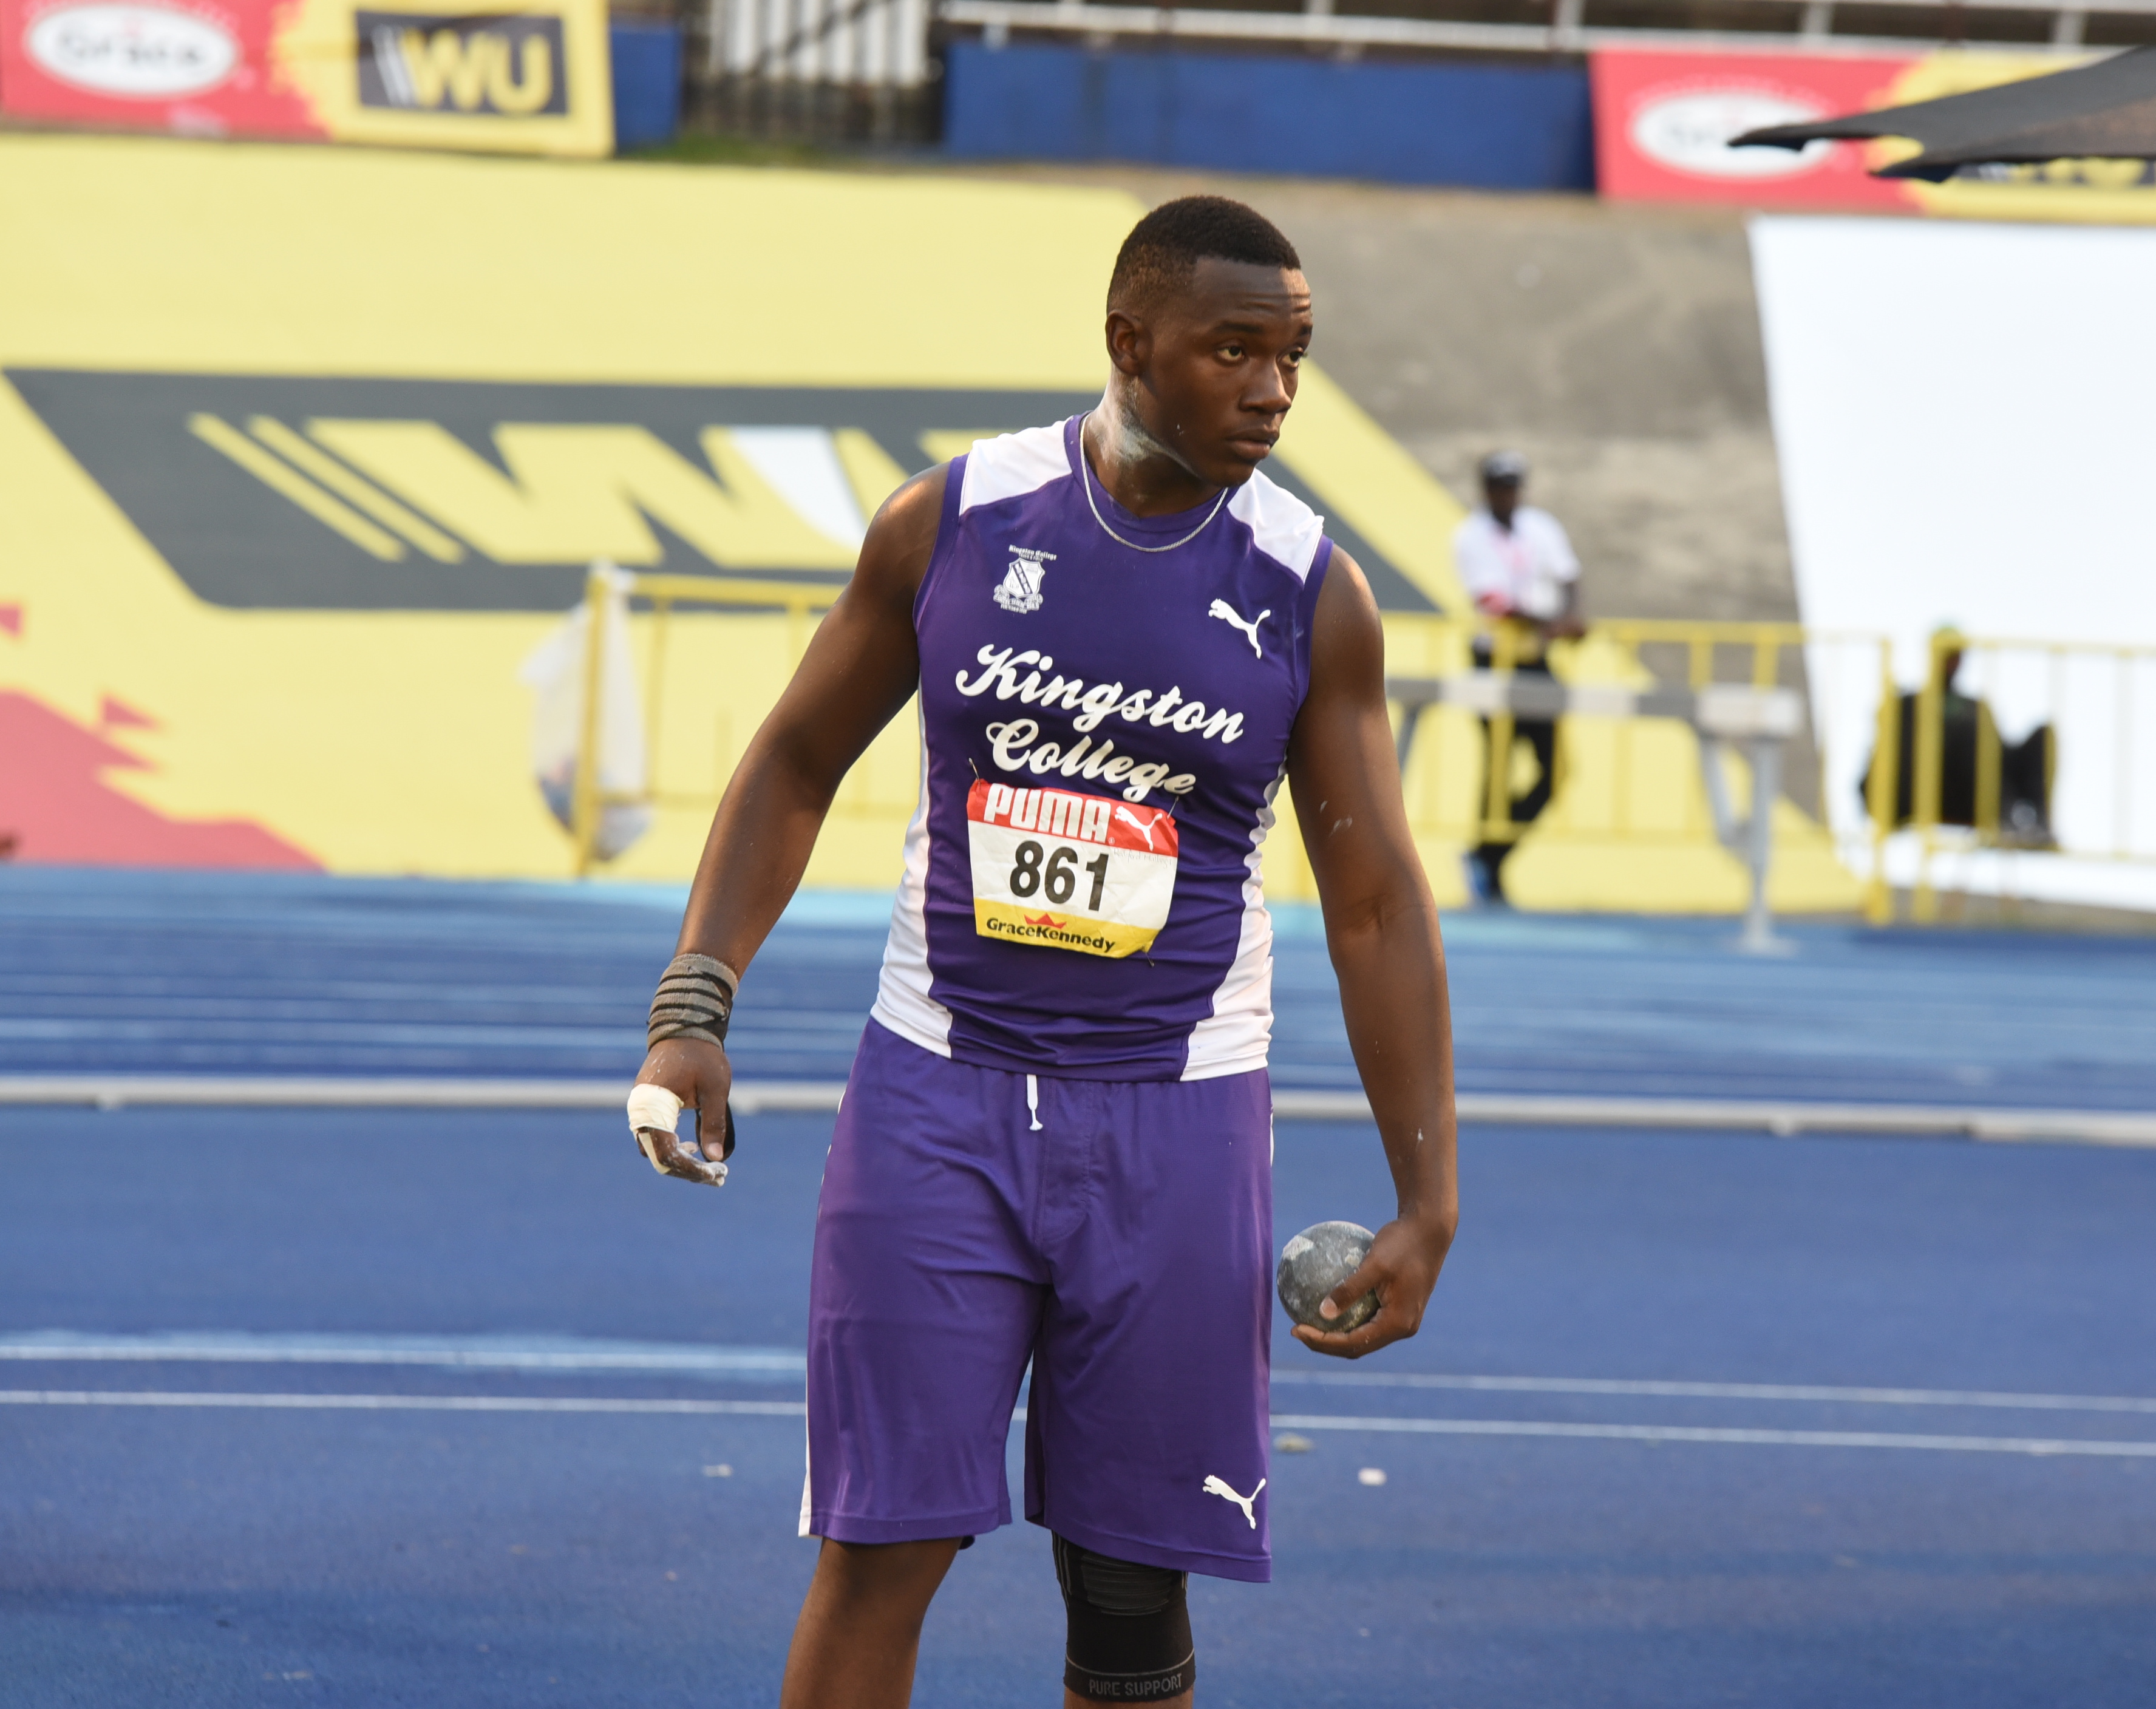 #Champs2019 | KC, Edwin Allen lead after day 3